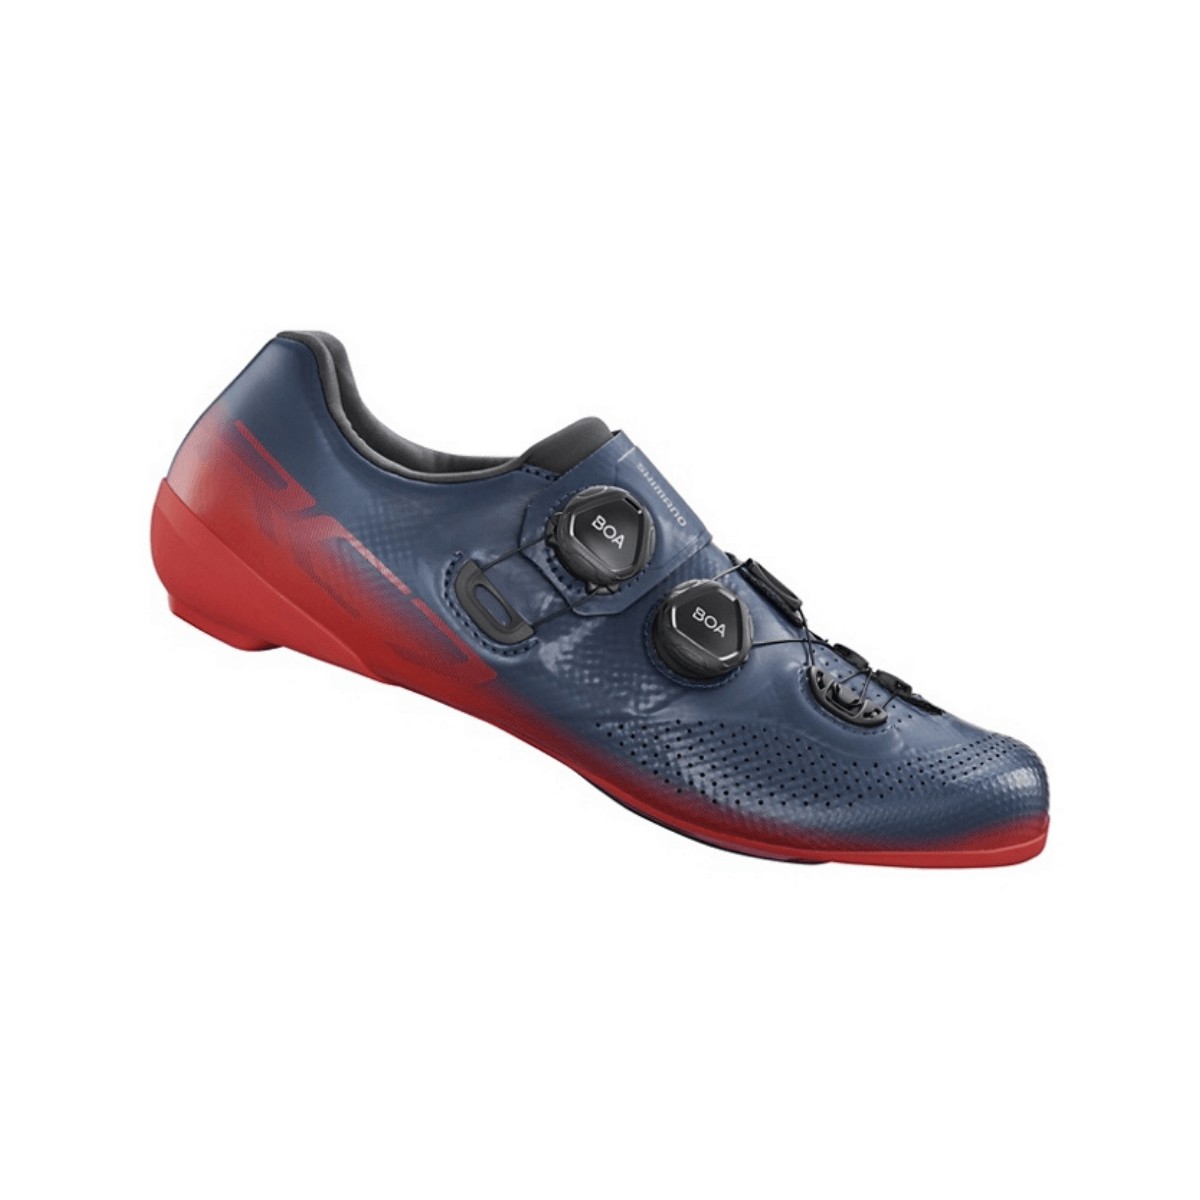 Shimano RC702 Road Shoes Red, Size 40 - EUR